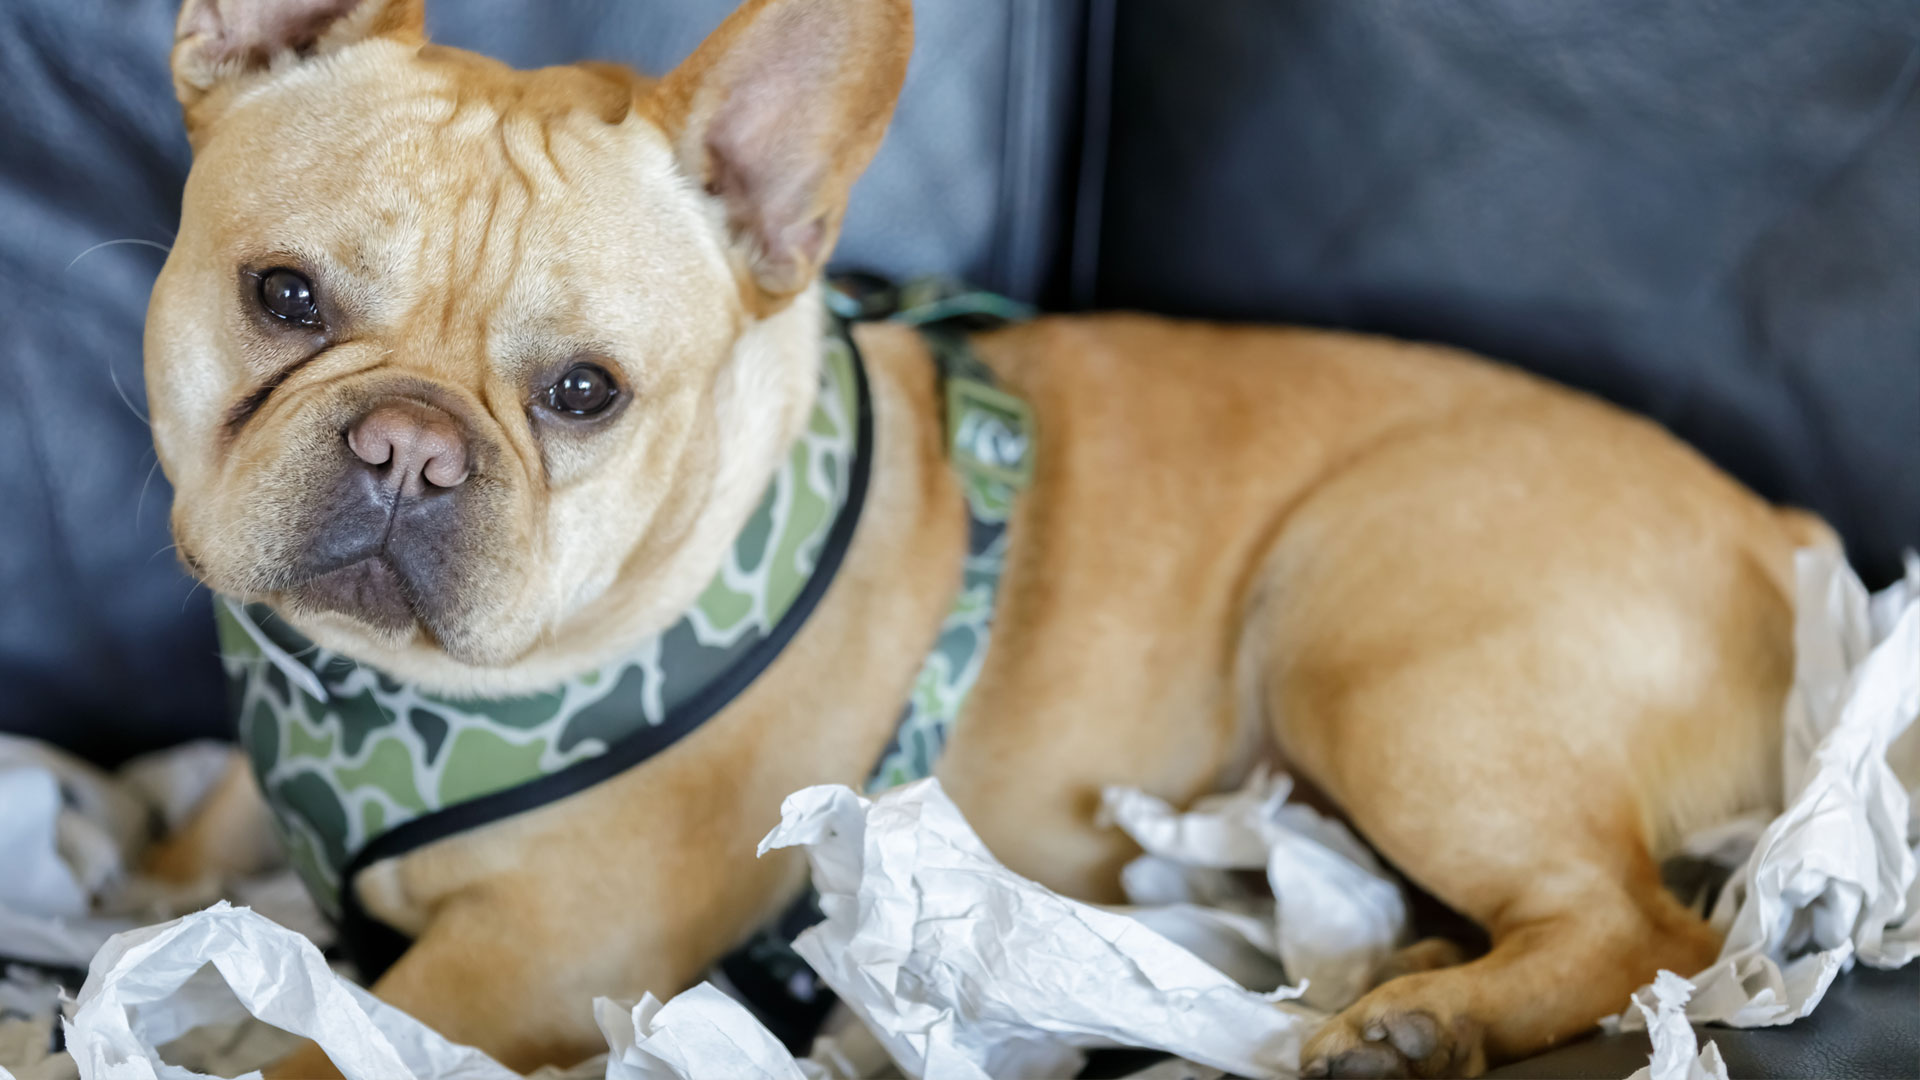 Ready, steady, shred! Try this trainer’s top tip to control your dog’s shredding behavior